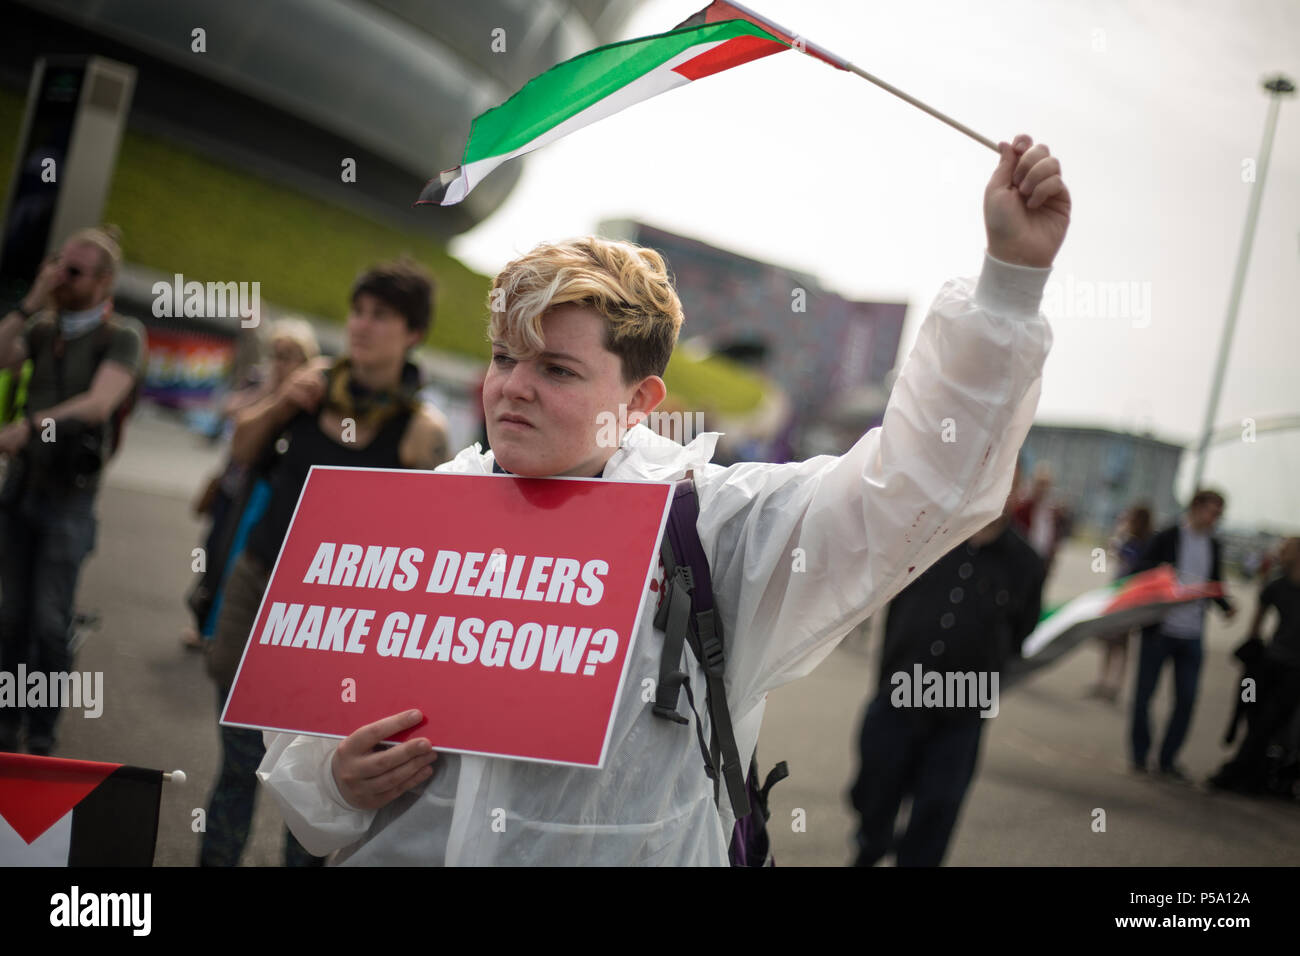 Glasgow, Scotland, on 26 June 2018. Glasgow Against The Arms Fair demonstration takes place outside the Undersea Defence Technology conference at the Scottish Exhibition Centre. The conference attracts 1,1000 delegates from around the world, and lead sponsors fair's lead sponsors, BAE Systems and Babcock International, have links to the Trident nuclear missile system. The Glasgow City Council has received criticism for appearing to initially support the arms fair. Image Credit: Jeremy Sutton-Hibbert/ Alamy Live News. Stock Photo